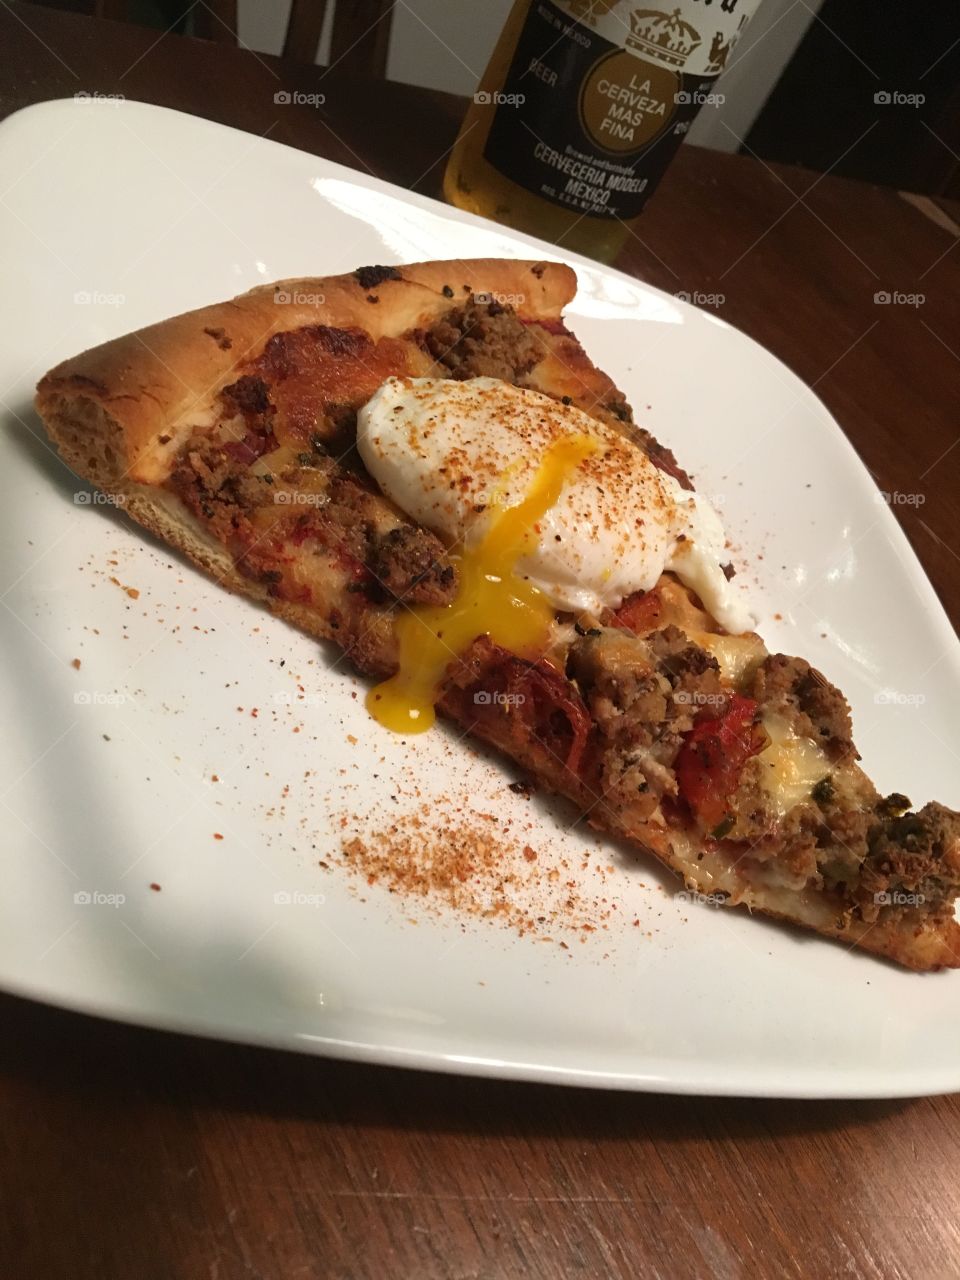 This is breakfast pizza.  